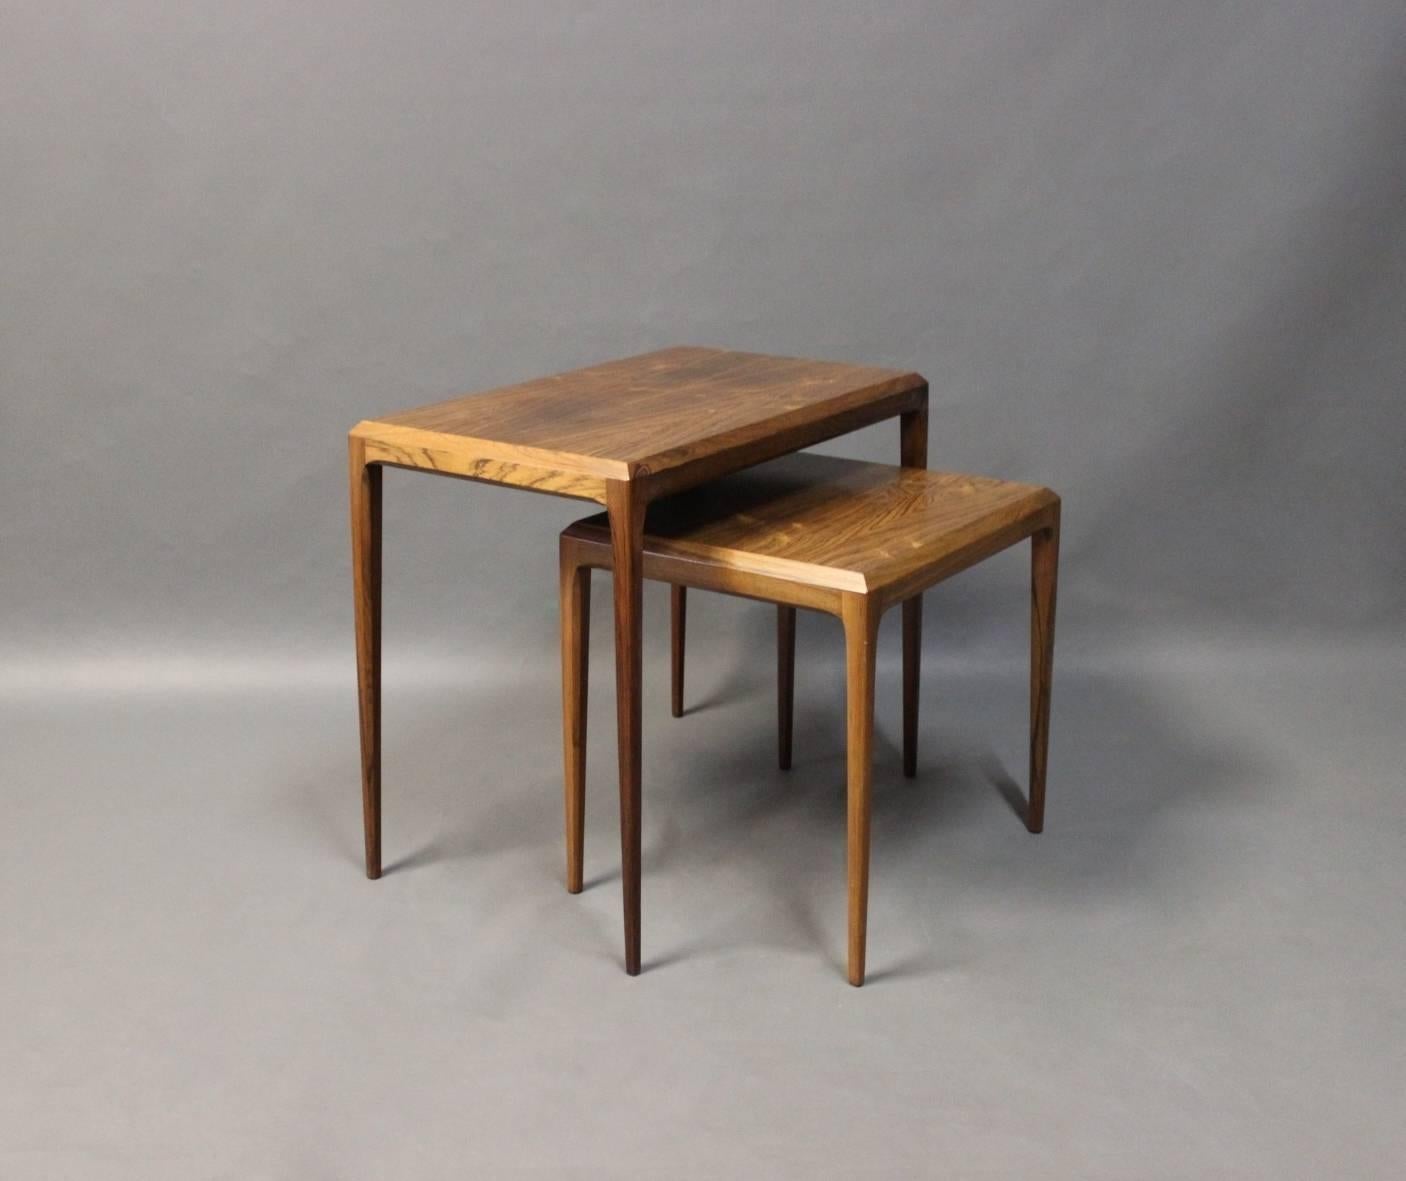 A set of nesting tables in rosewood designed by Johannes Andersen and manufactured by CFC Silkeborg in the 1960s.
Measurements for the smaller table:
H - 42 cm, W - 44 cm and D - 36 cm.